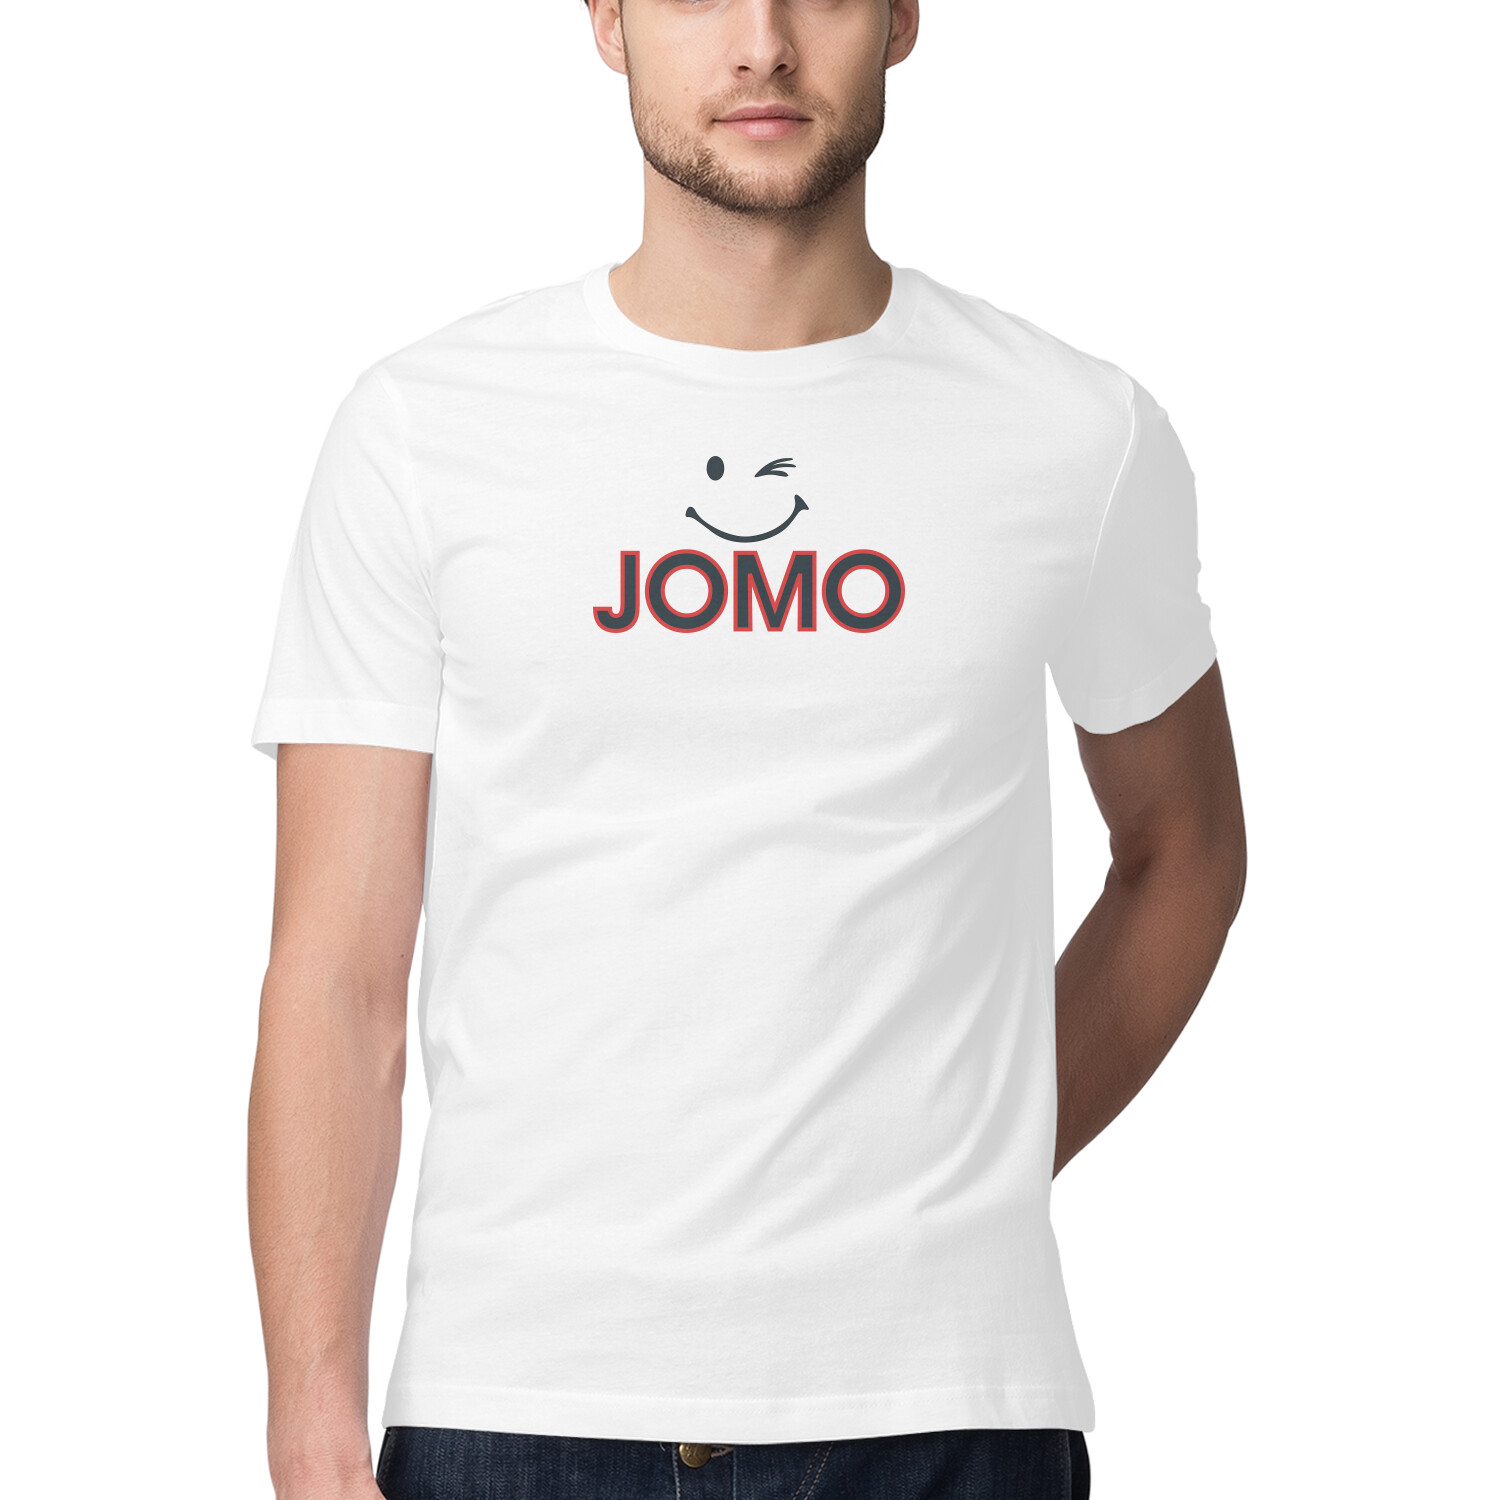 JOMO SMILEY, Funny T-shirt quotes and sayings